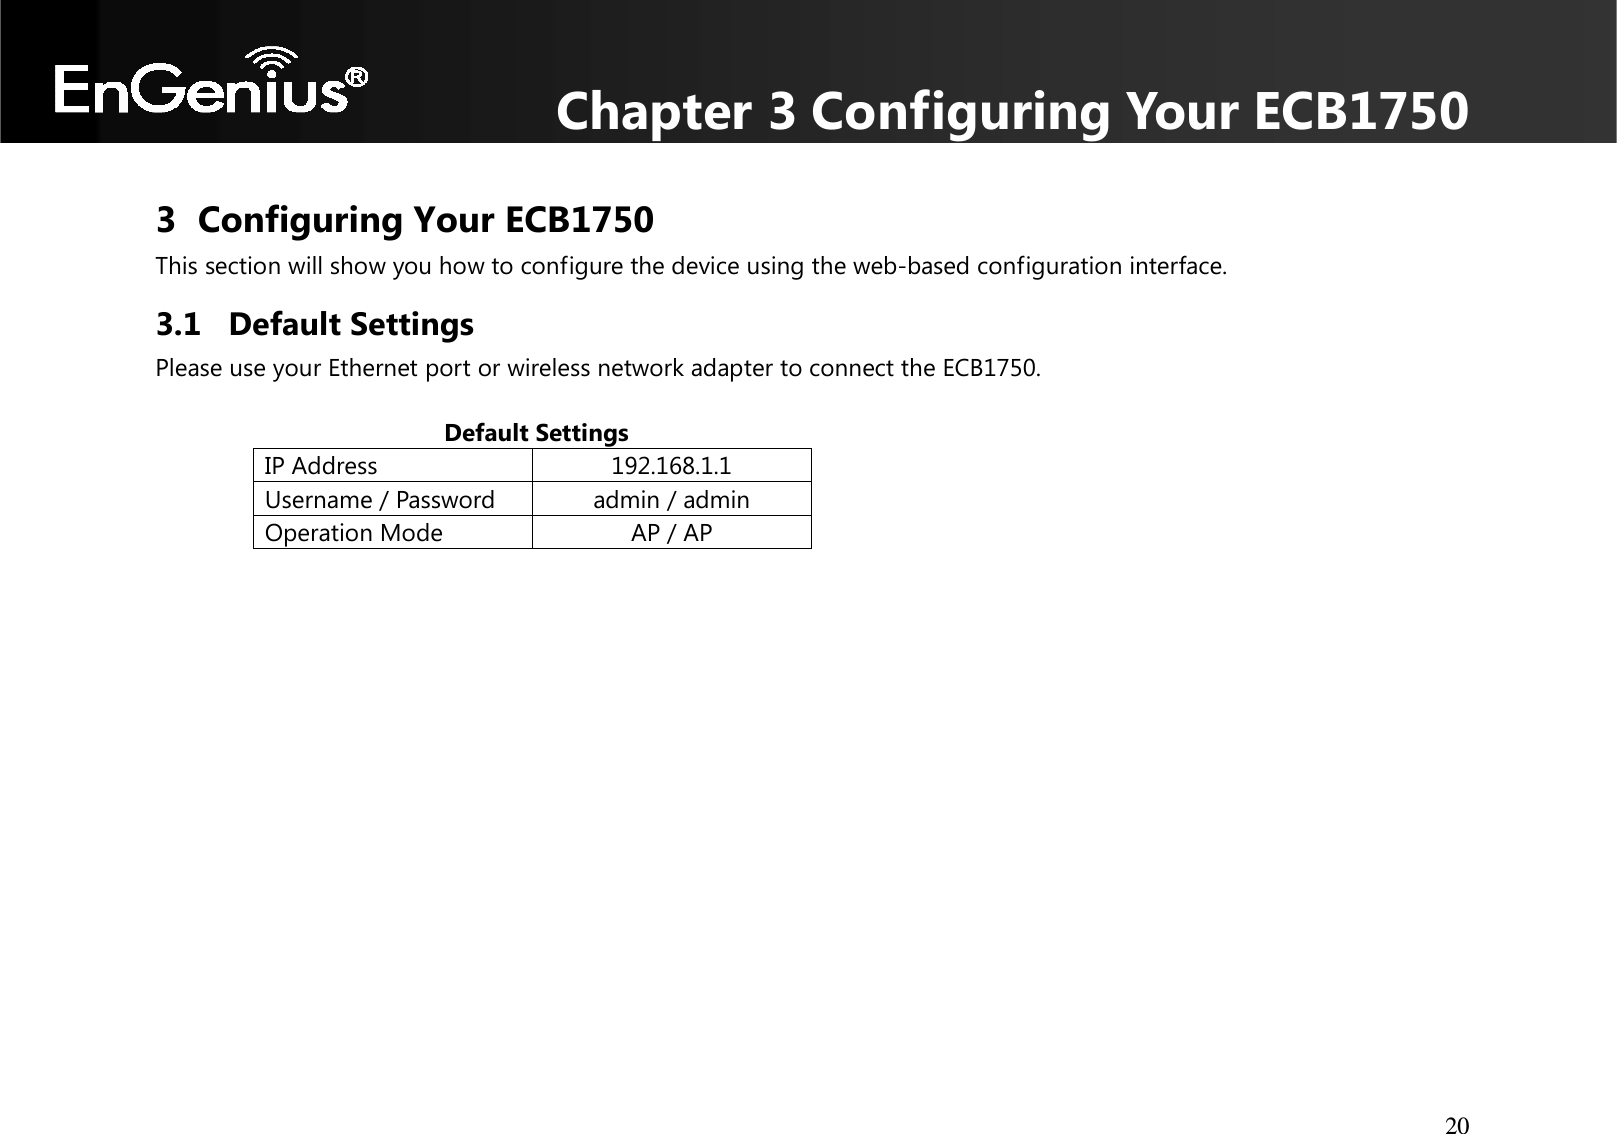 Chapter 3 Configuring Your ECB1750 20  3 Configuring Your ECB1750 This section will show you how to configure the device using the web-based configuration interface. 3.1 Default Settings Please use your Ethernet port or wireless network adapter to connect the ECB1750.                                             Default Settings IP Address 192.168.1.1 Username / Password admin / admin Operation Mode AP / AP     